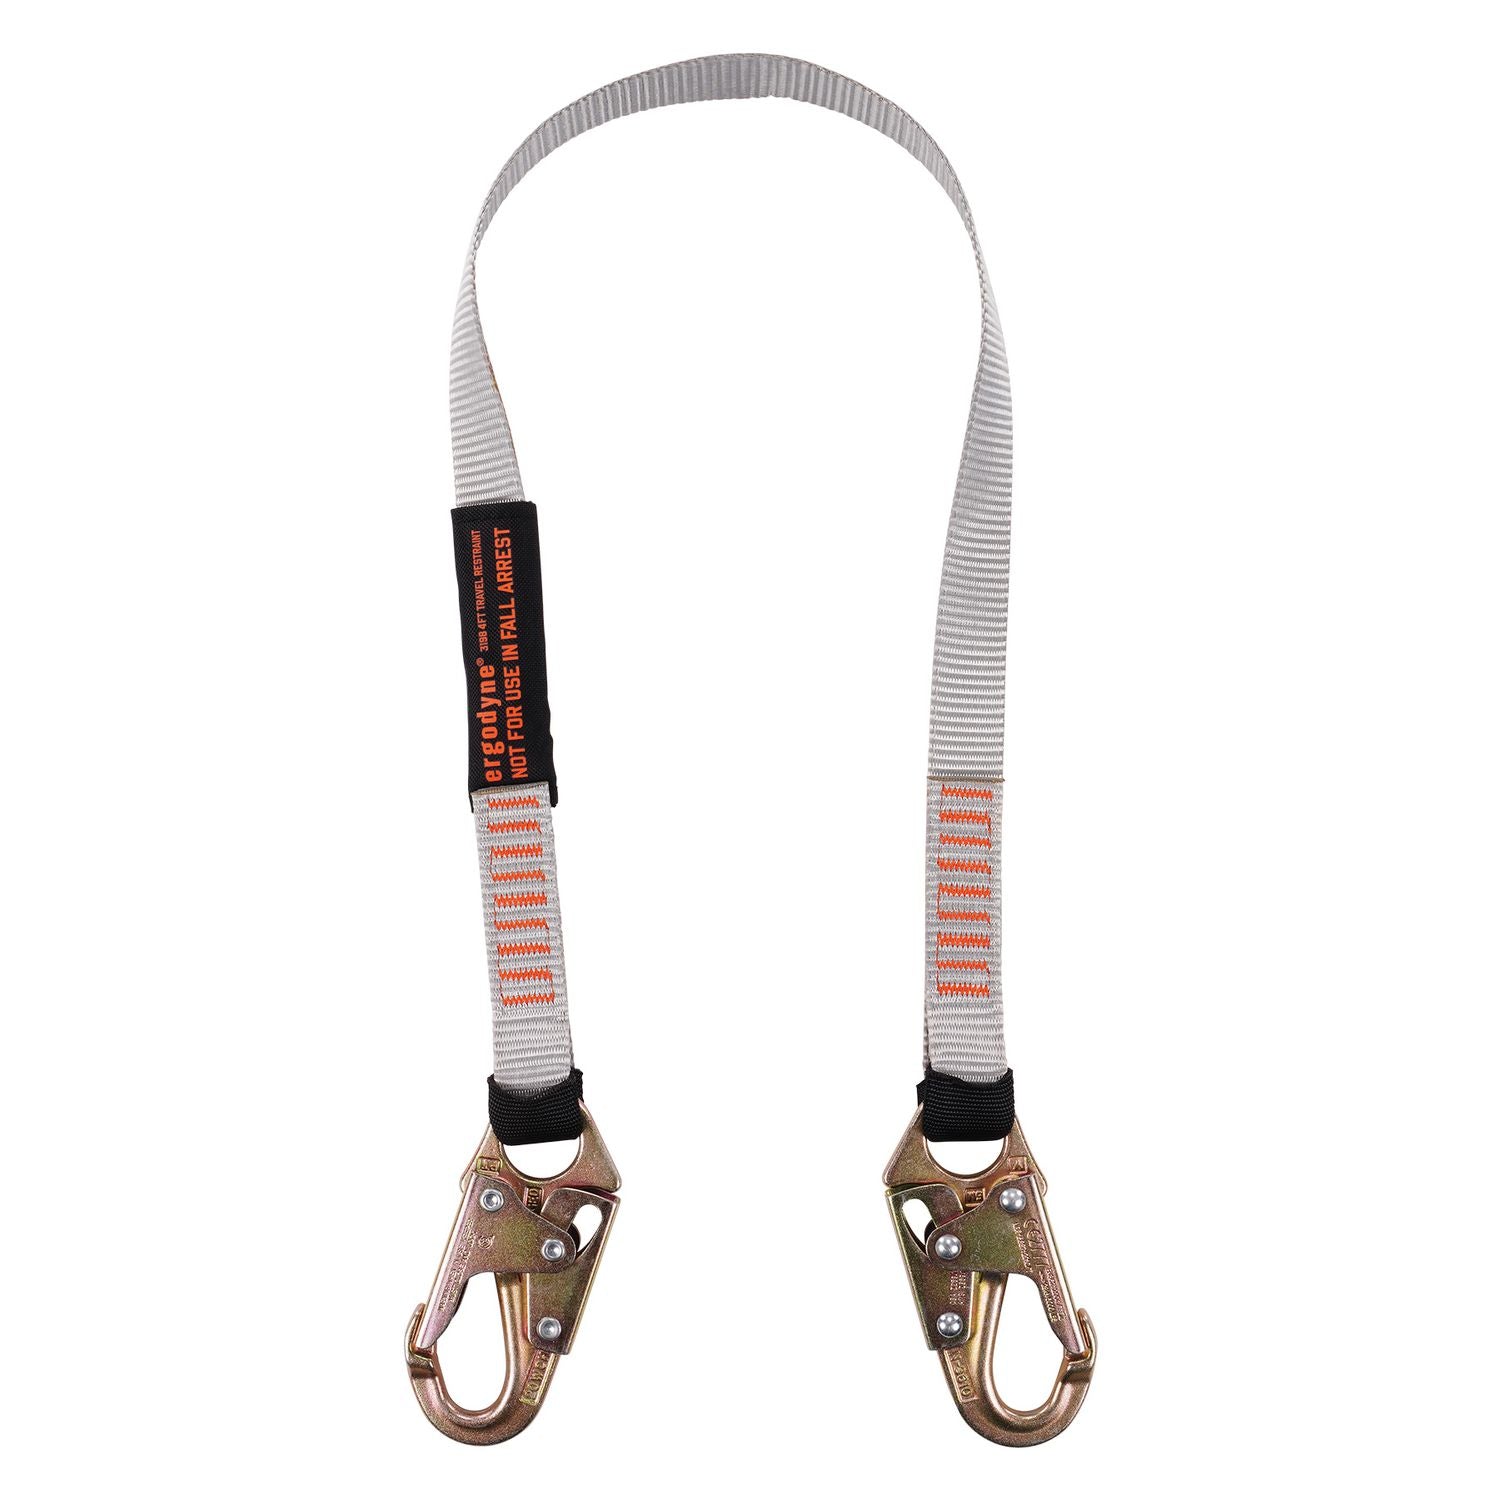 3201-harness-plus-4-ft-travel-restraint-lanyard-3197-3198-ships-in-1-3-business-days_ego19671 - 2